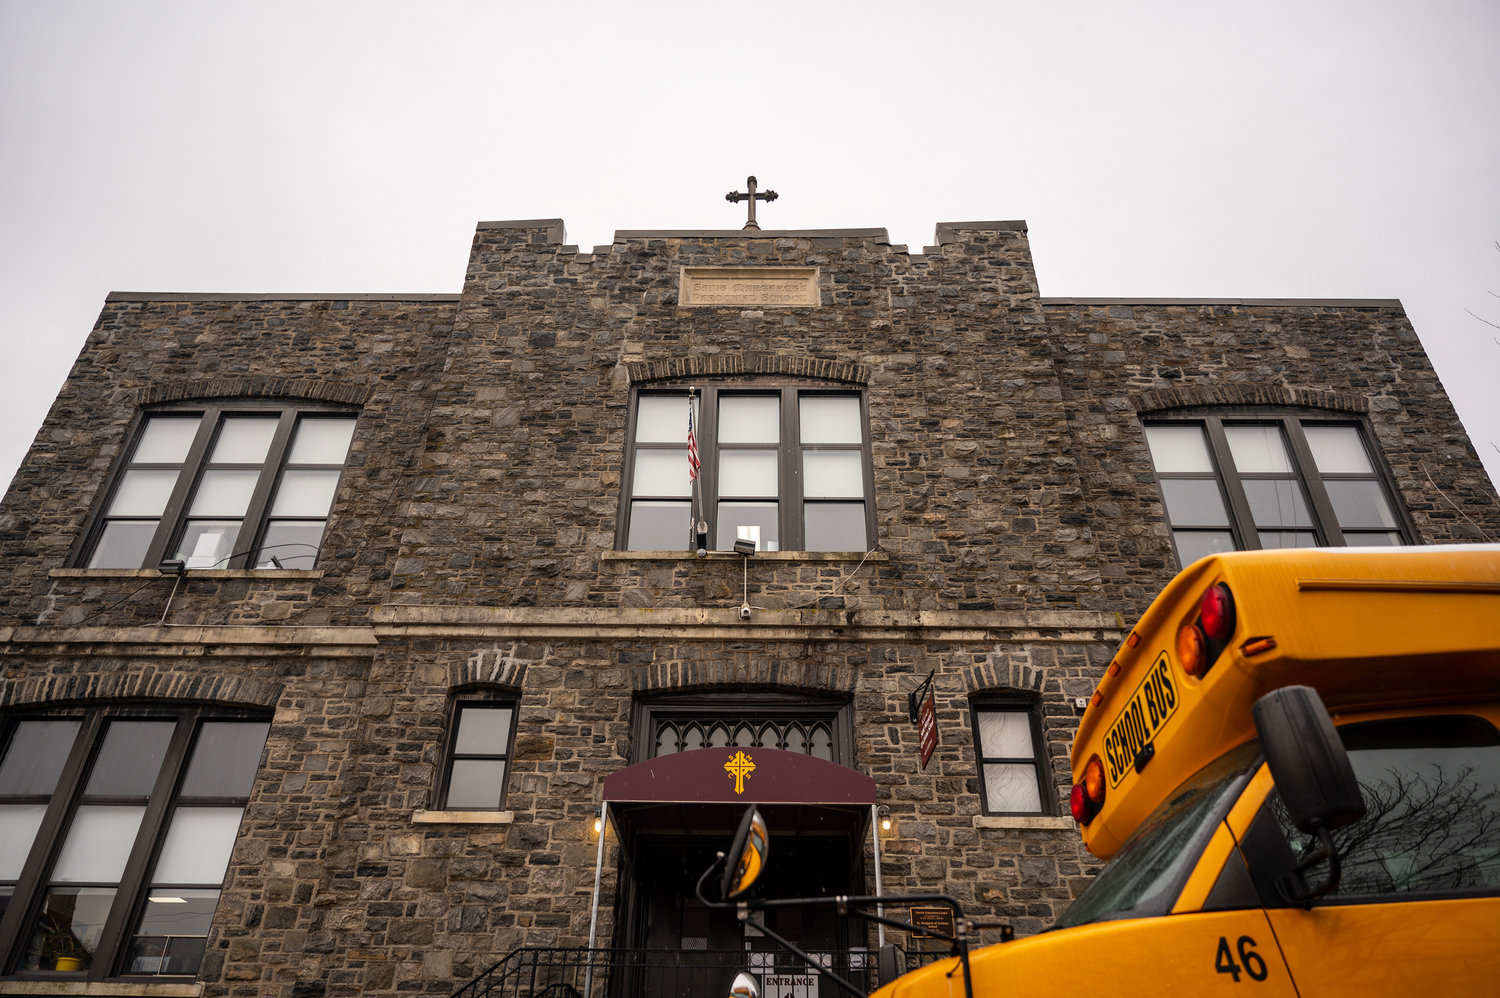 The former St. Margaret of Cortona School is the site where a former student alleges fellow students bullied her for years because of her learning disability. The former student and her father filed a federal lawsuit last month against the school and its administration.